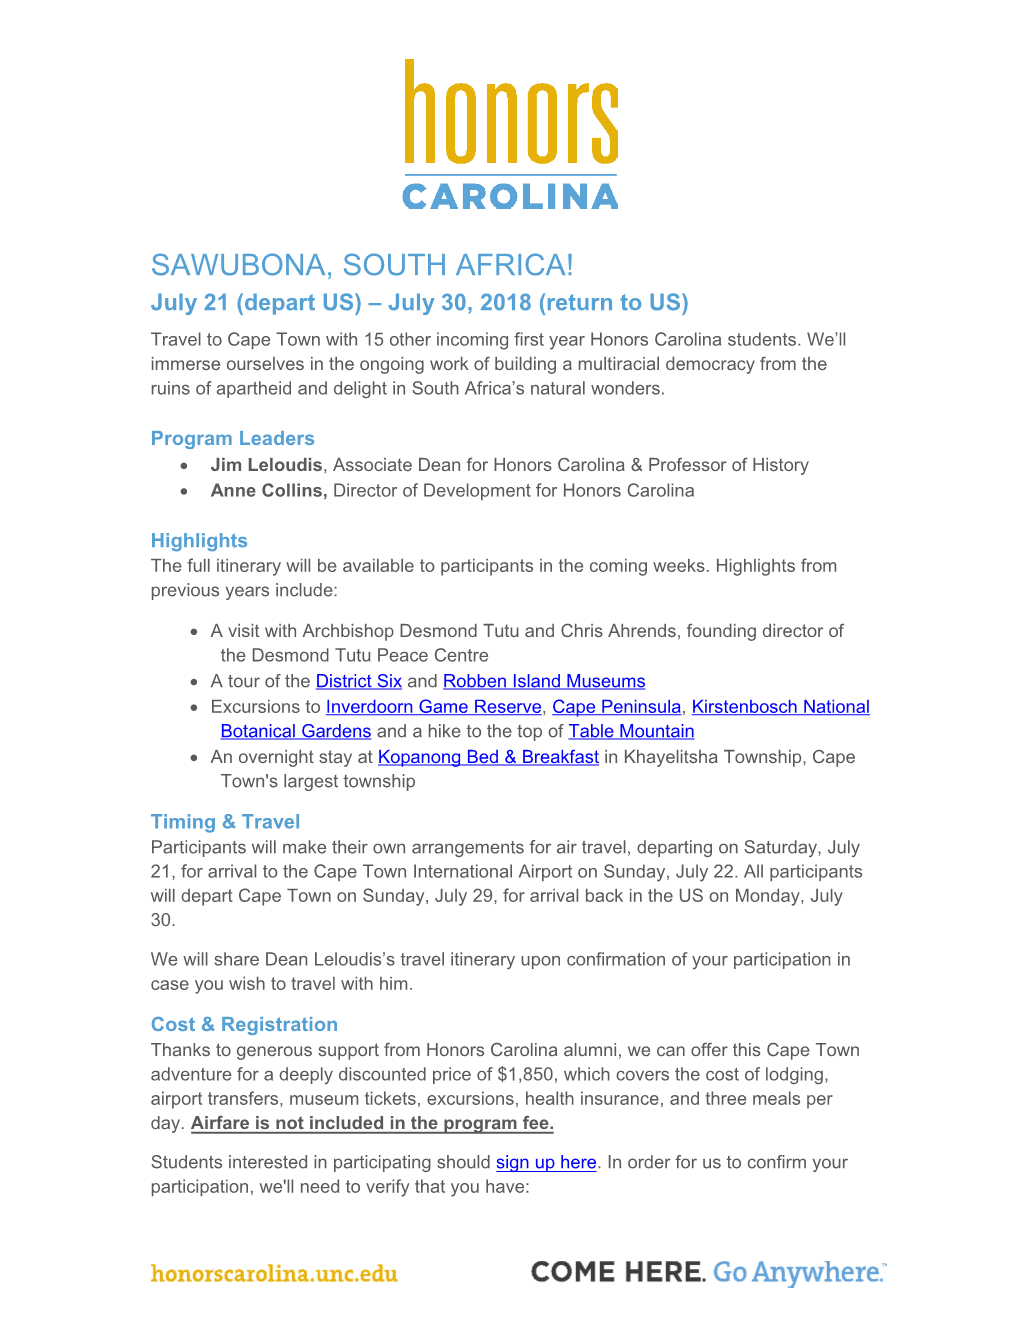 SAWUBONA, SOUTH AFRICA! July 21 (Depart US) – July 30, 2018 (Return to US) Travel to Cape Town with 15 Other Incoming First Year Honors Carolina Students